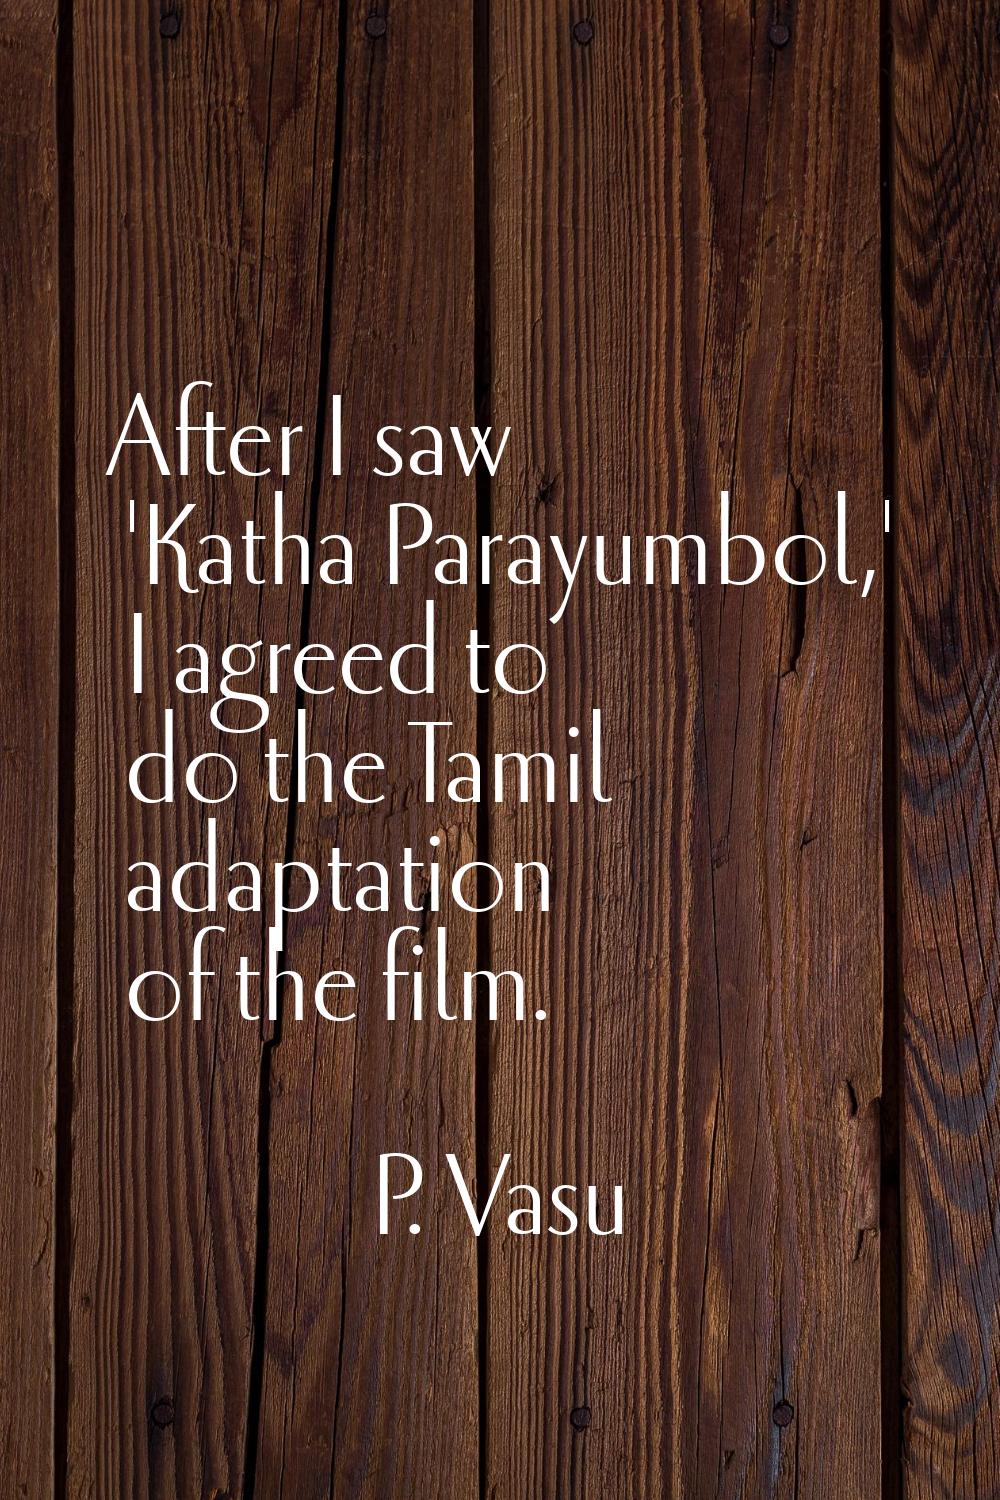 After I saw 'Katha Parayumbol,' I agreed to do the Tamil adaptation of the film.